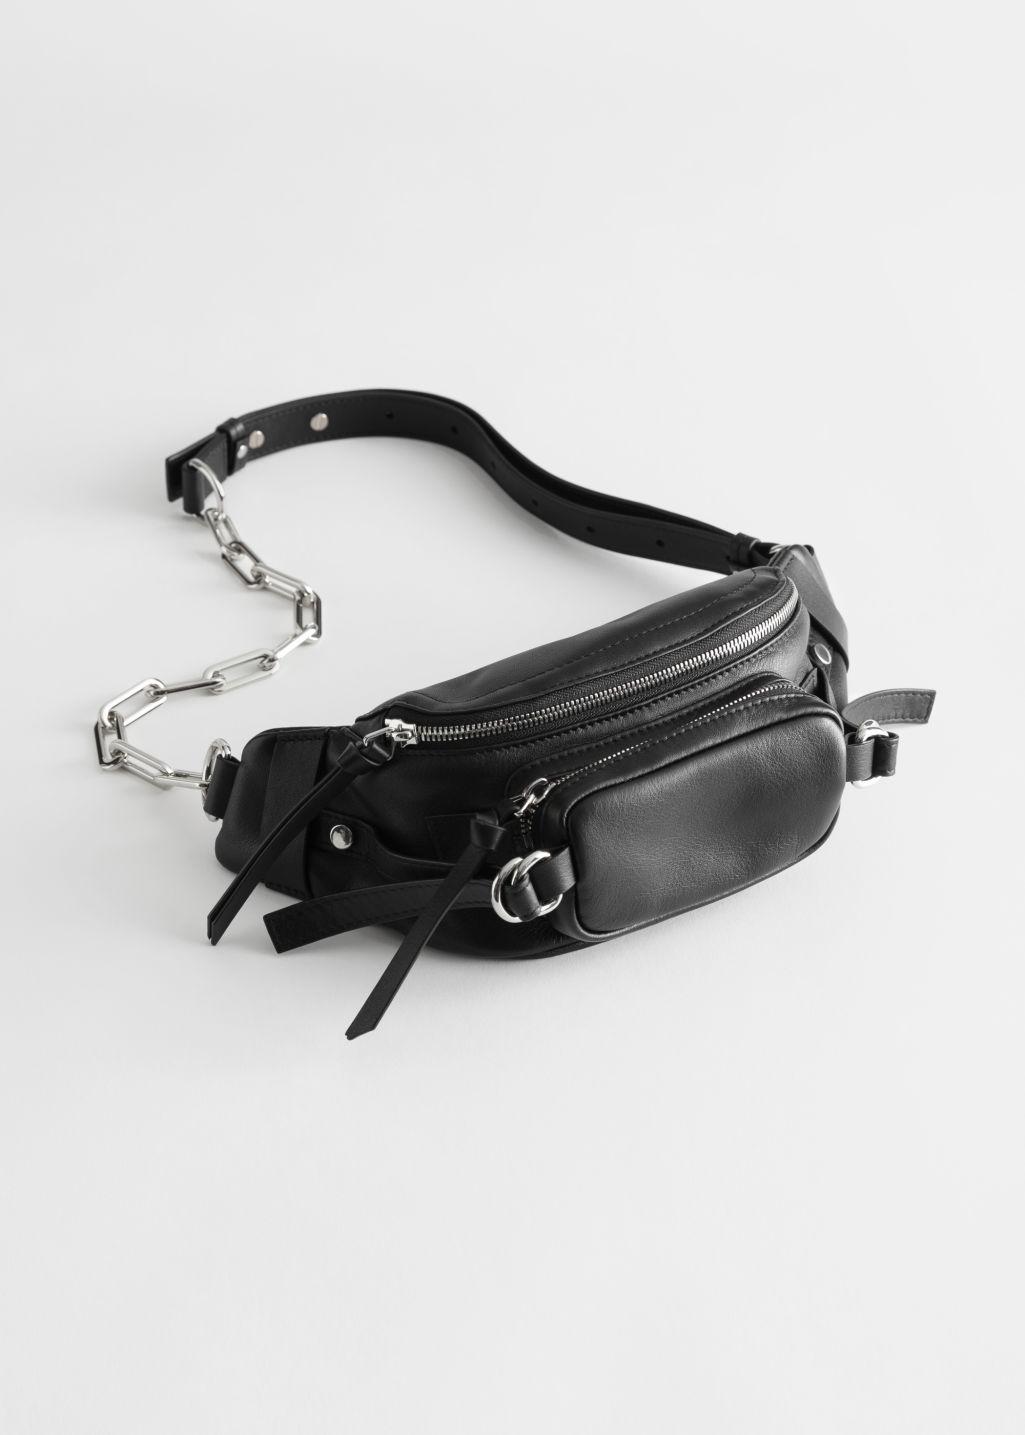 & Other Stories Half Chain Leather Belt Bag in Black | Lyst Canada